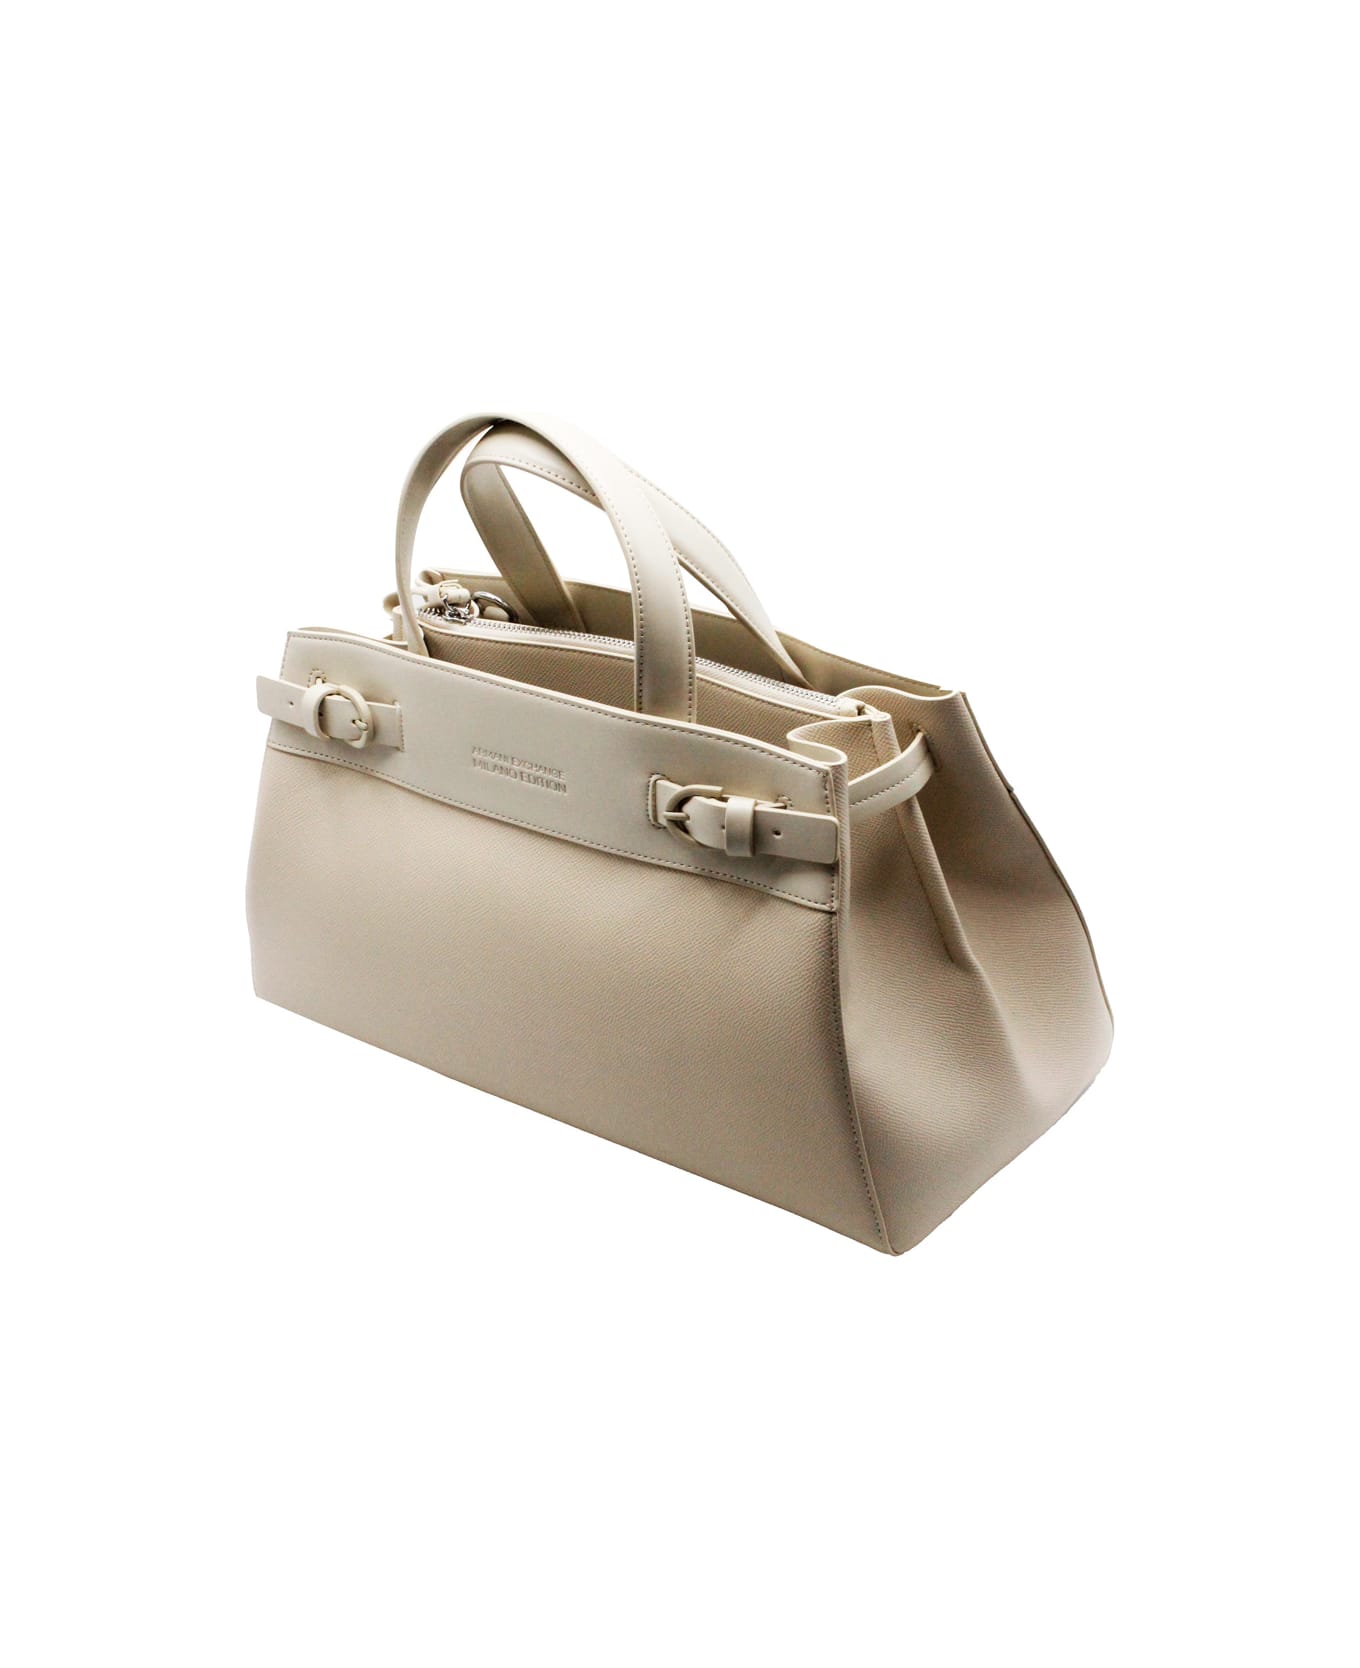 Armani Collezioni Eco Leather Shopping Bag With Double Compartment And Central Pocket Closed With Zip And Equipped With Shoulder Strap, Size 36x23x16 - Beige